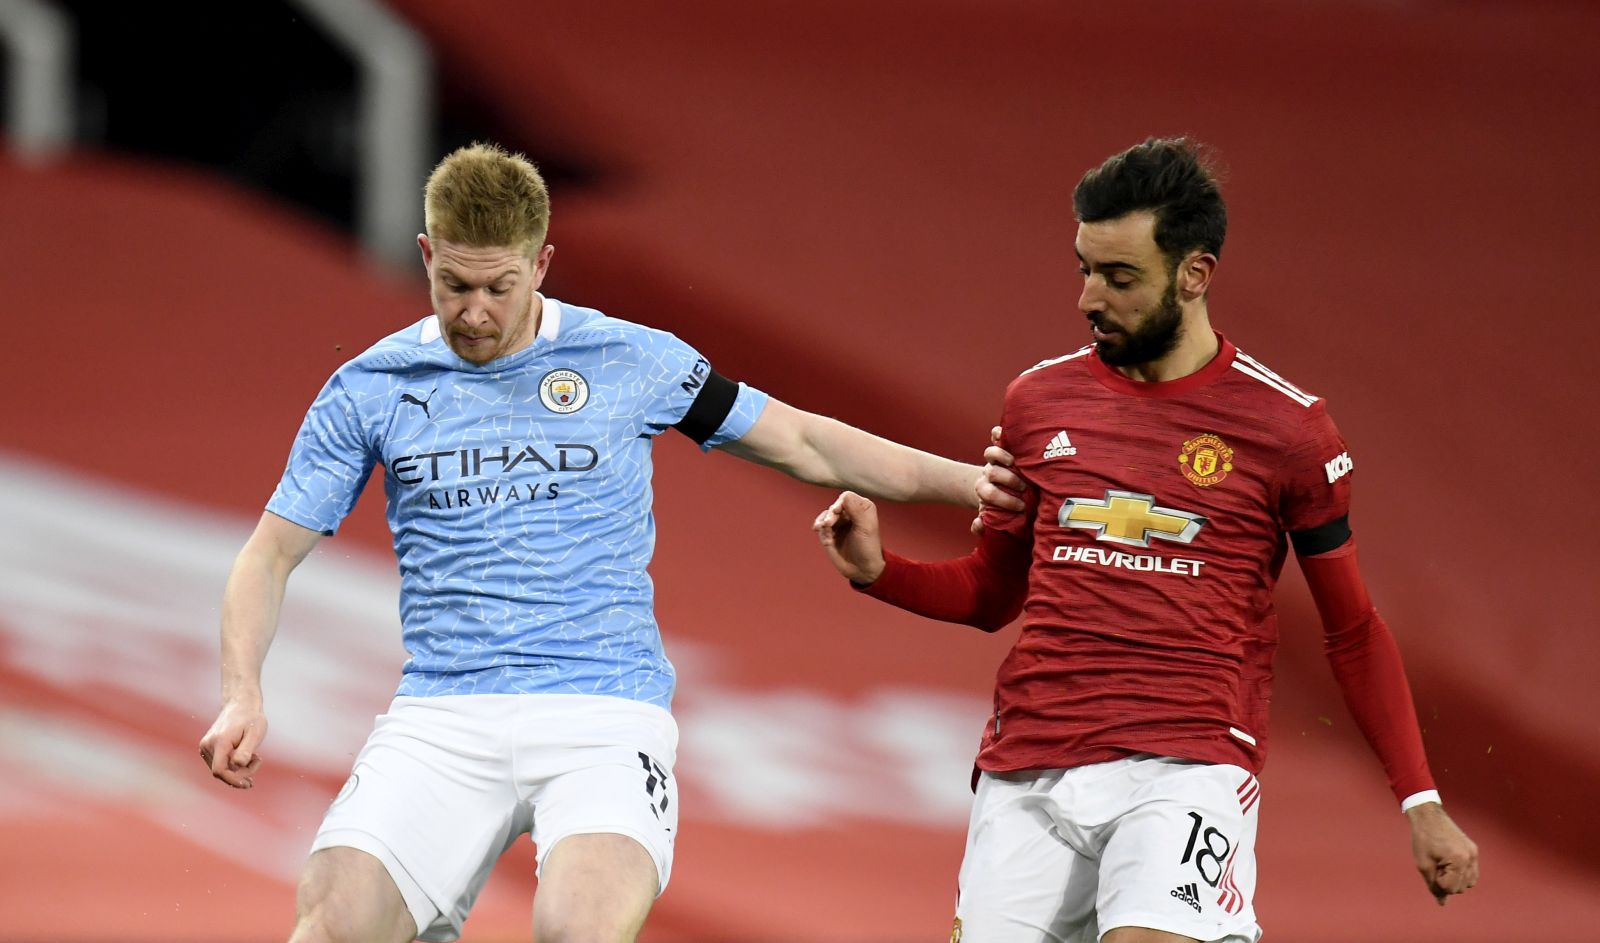 epa08923345 Bruno Fernandes of Manchester United (R) in action against Kevin de Bruyne of Manchester City (L) during the English Carabao Cup semi final soccer match between Manchester United vs Manchester City in Manchester, Britain, 06 January 2021.  EPA/Peter Powell / POOL EDITORIAL USE ONLY. No use with unauthorized audio, video, data, fixture lists, club/league logos or 'live' services. Online in-match use limited to 120 images, no video emulation. No use in betting, games or single club/league/player publications.